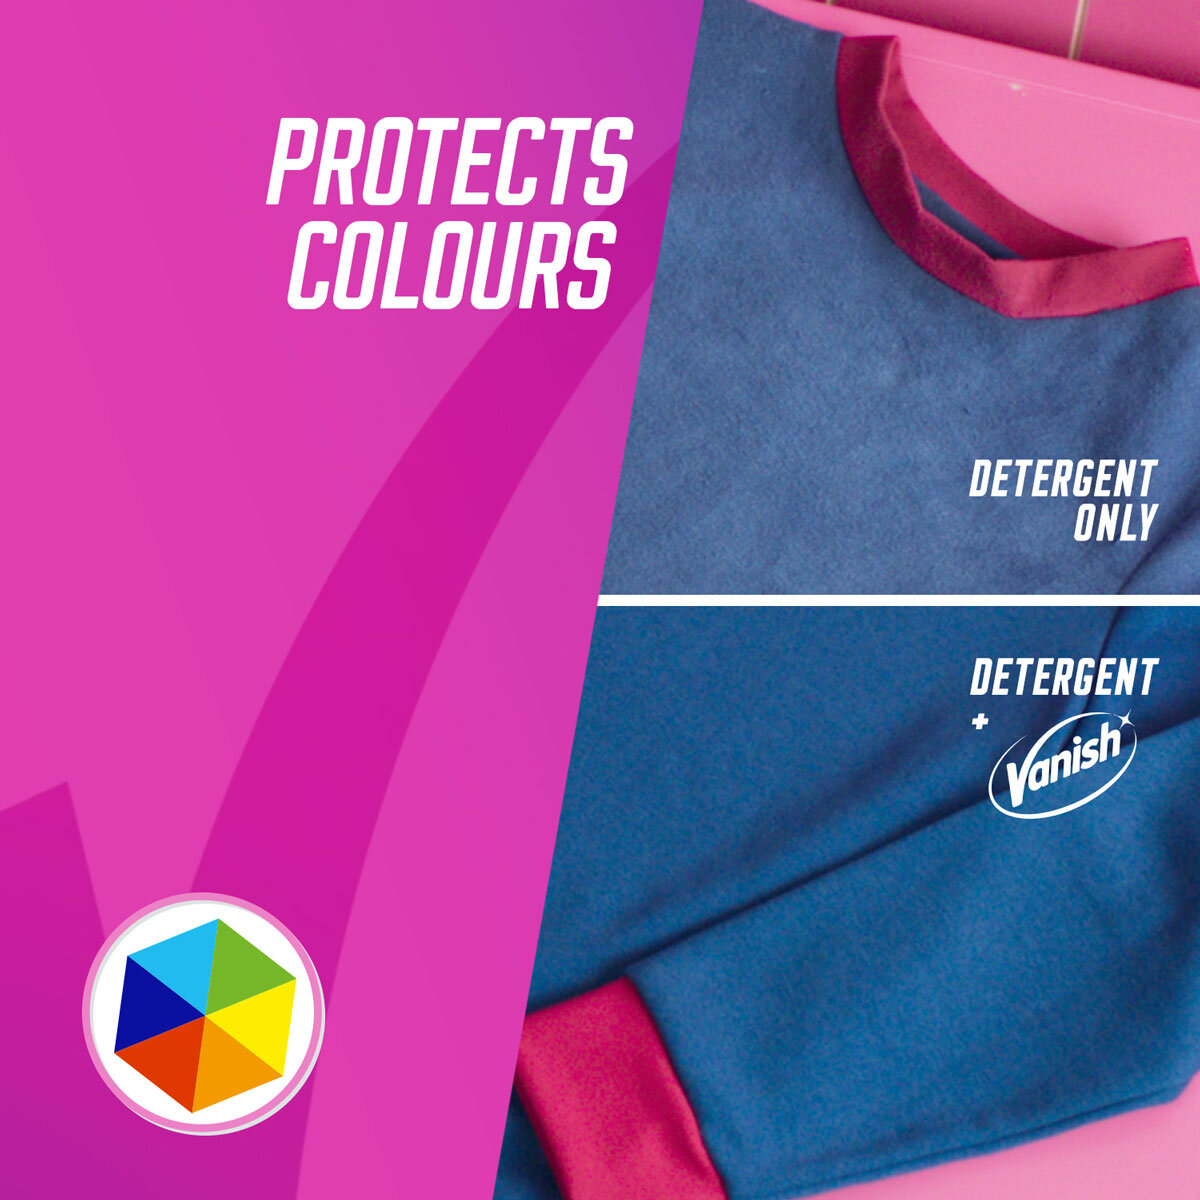 Protects Colours